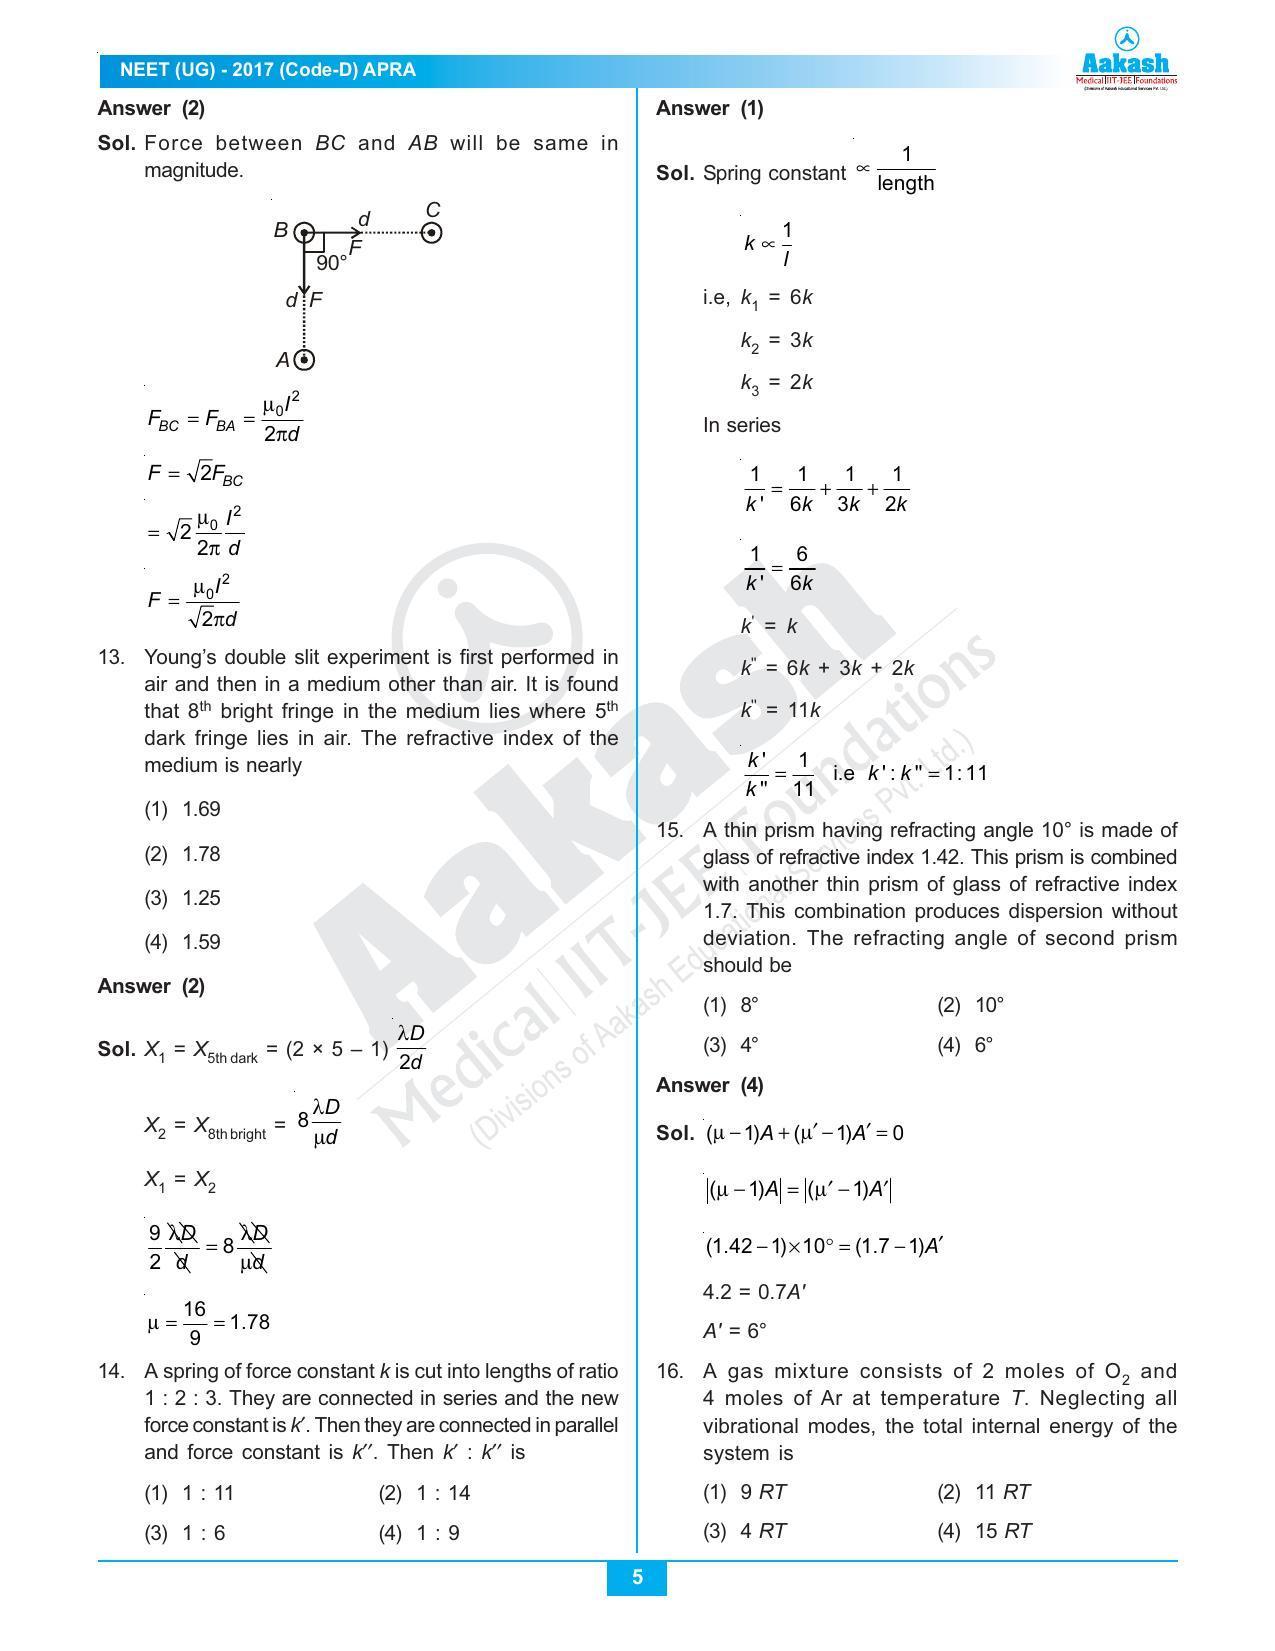  NEET Code D 2017 Answer & Solutions - Page 5